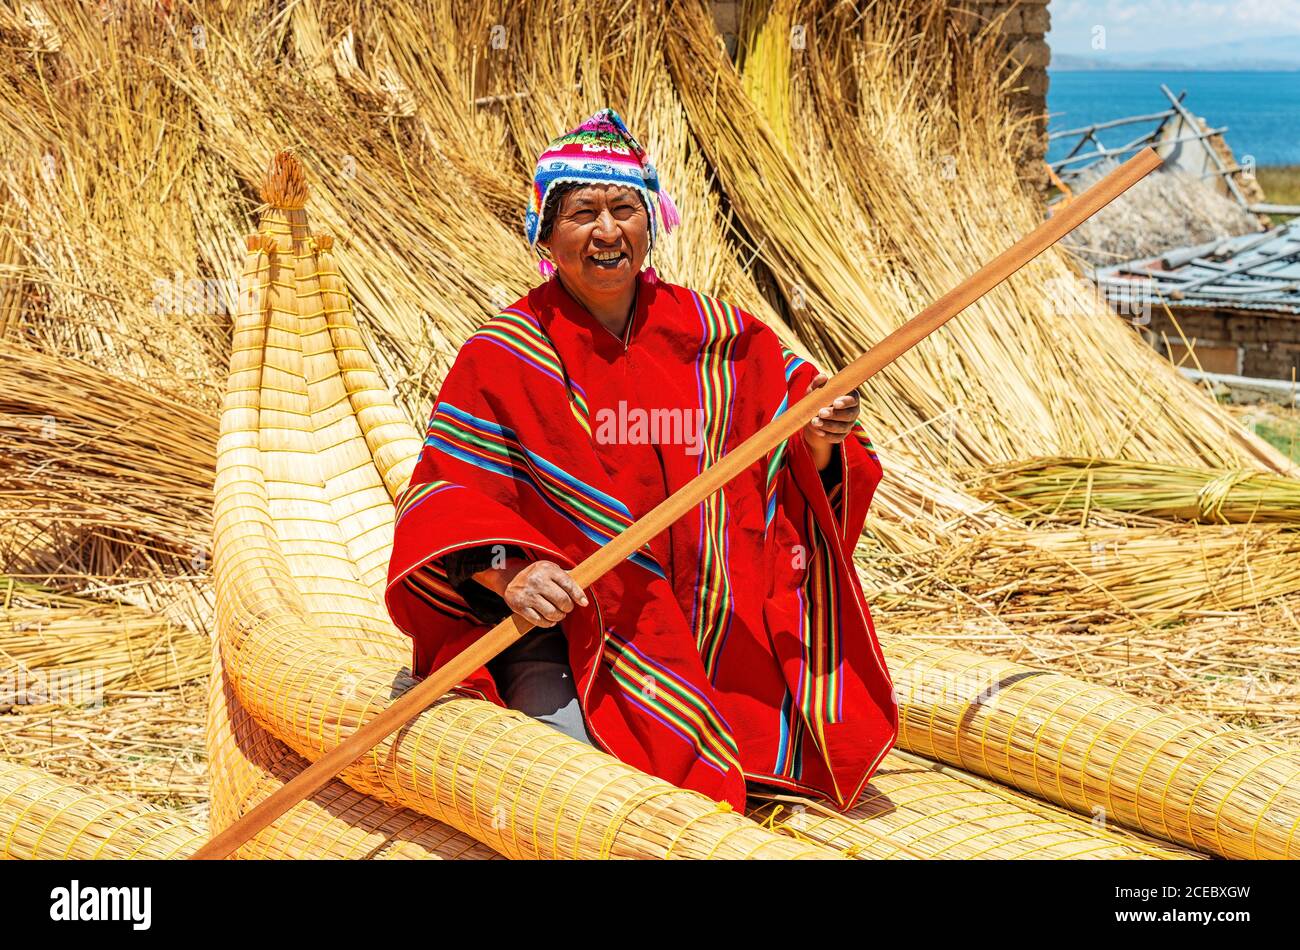 A smiling Aymara indigenous man in a red poncho doing a demonstration on how row a totora reed boat, Titicaca Lake, Bolivia. Stock Photo